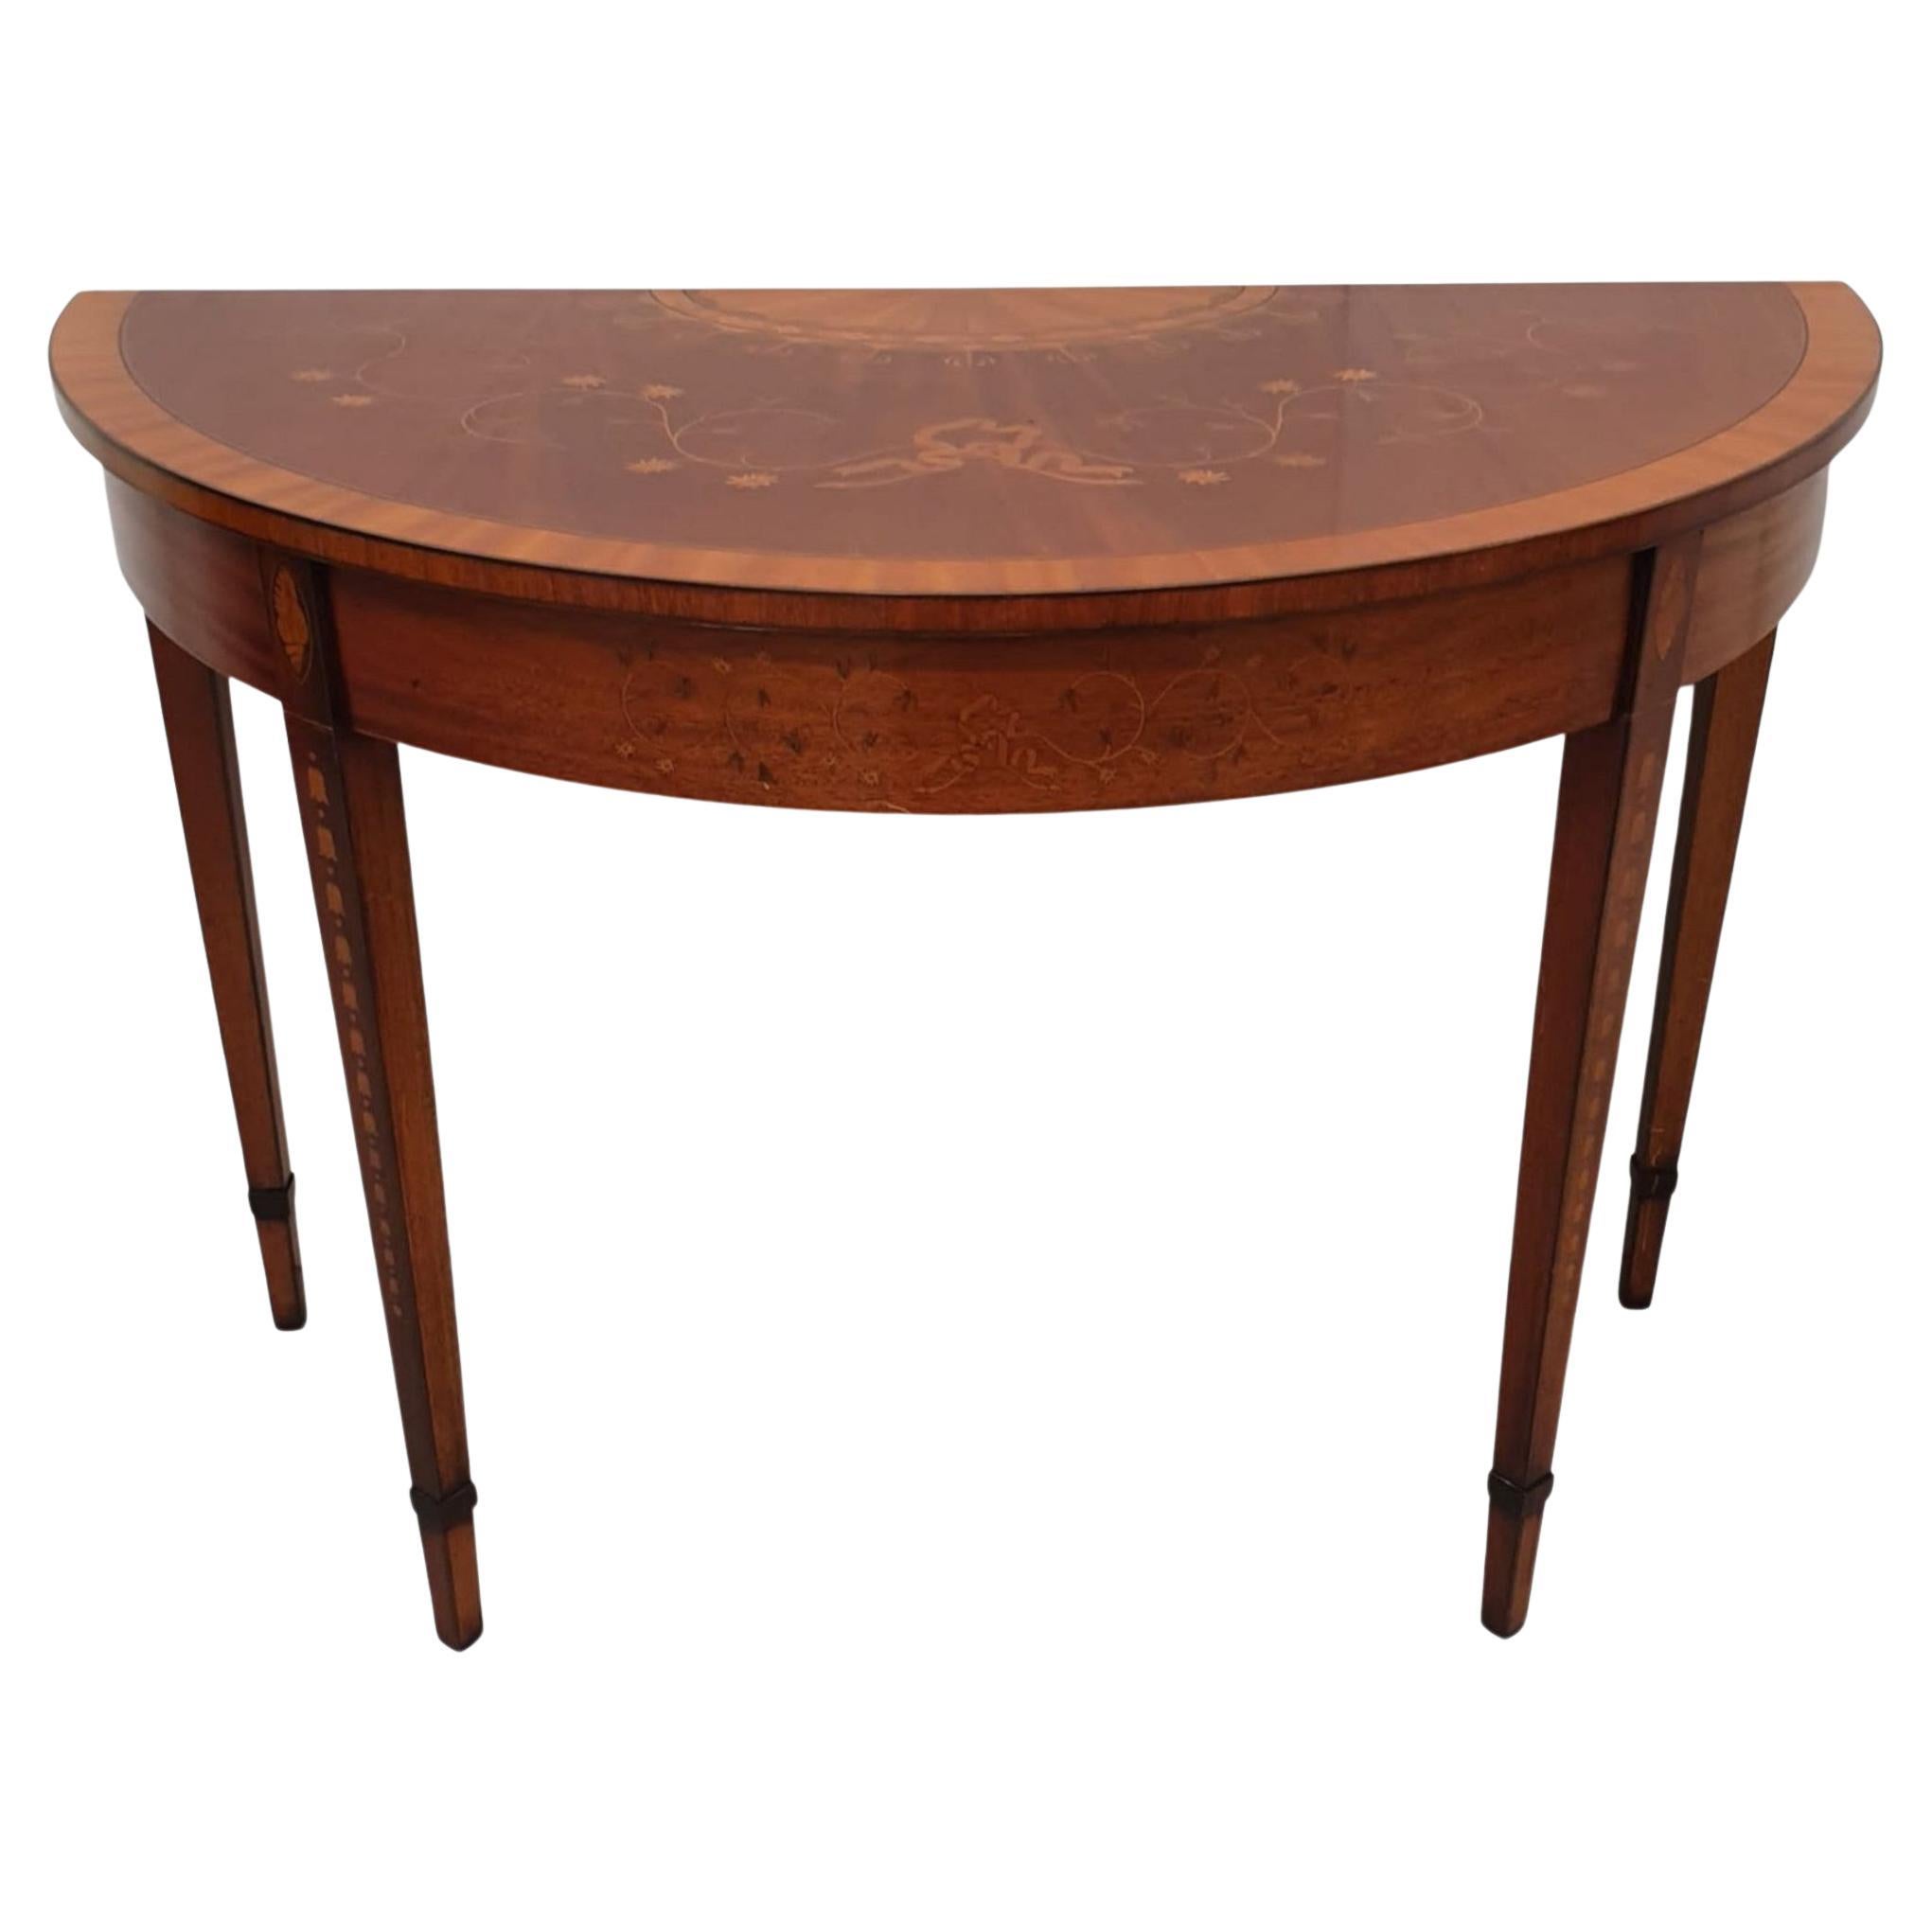 Fabulous Mid-20th Century Inlaid Demi Lune Table